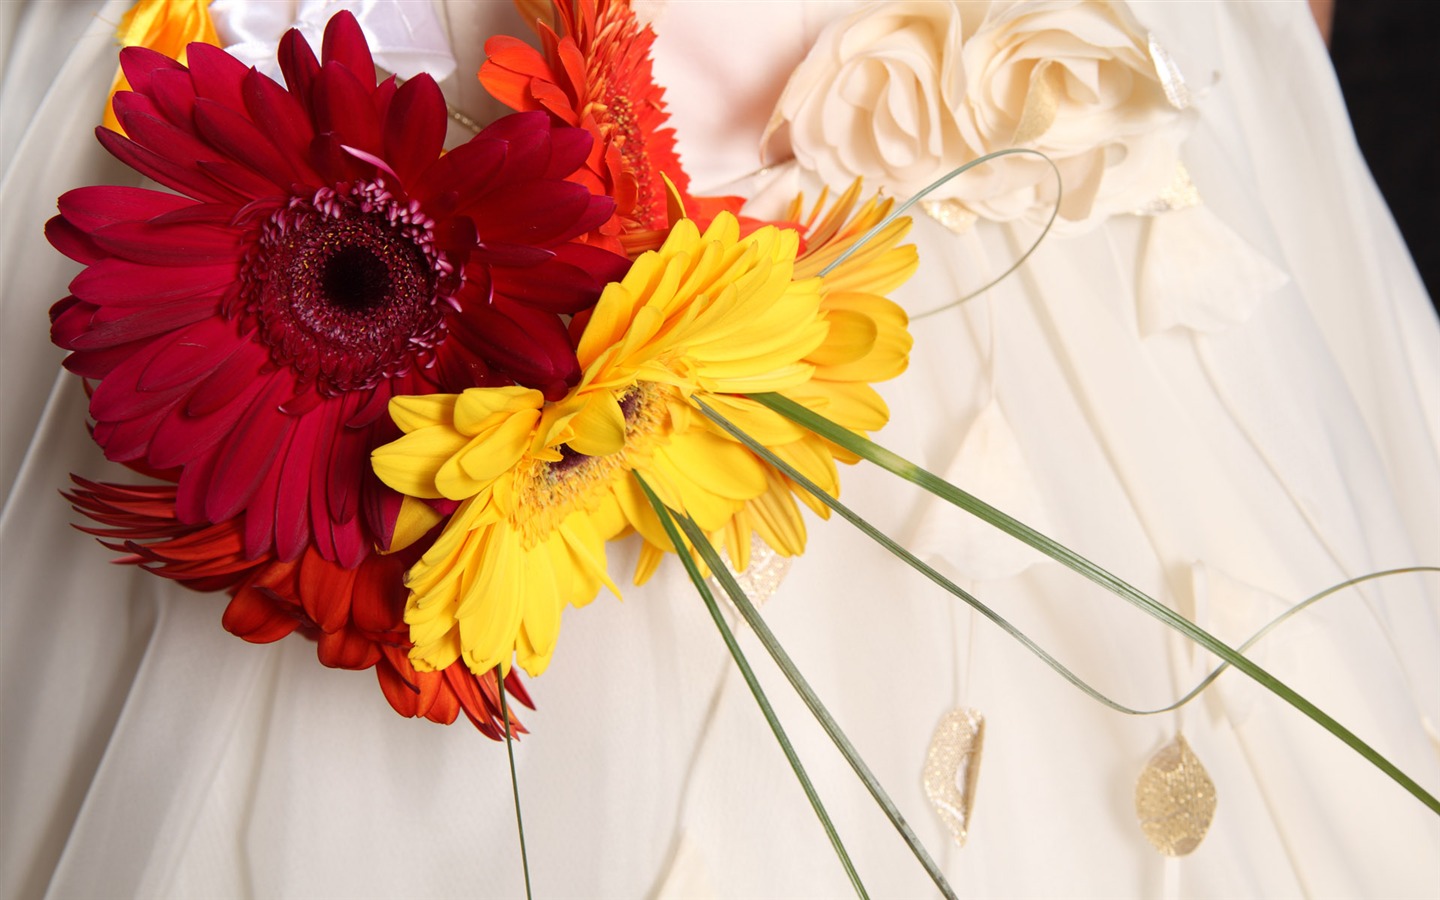 Weddings and Flowers wallpaper (2) #8 - 1440x900